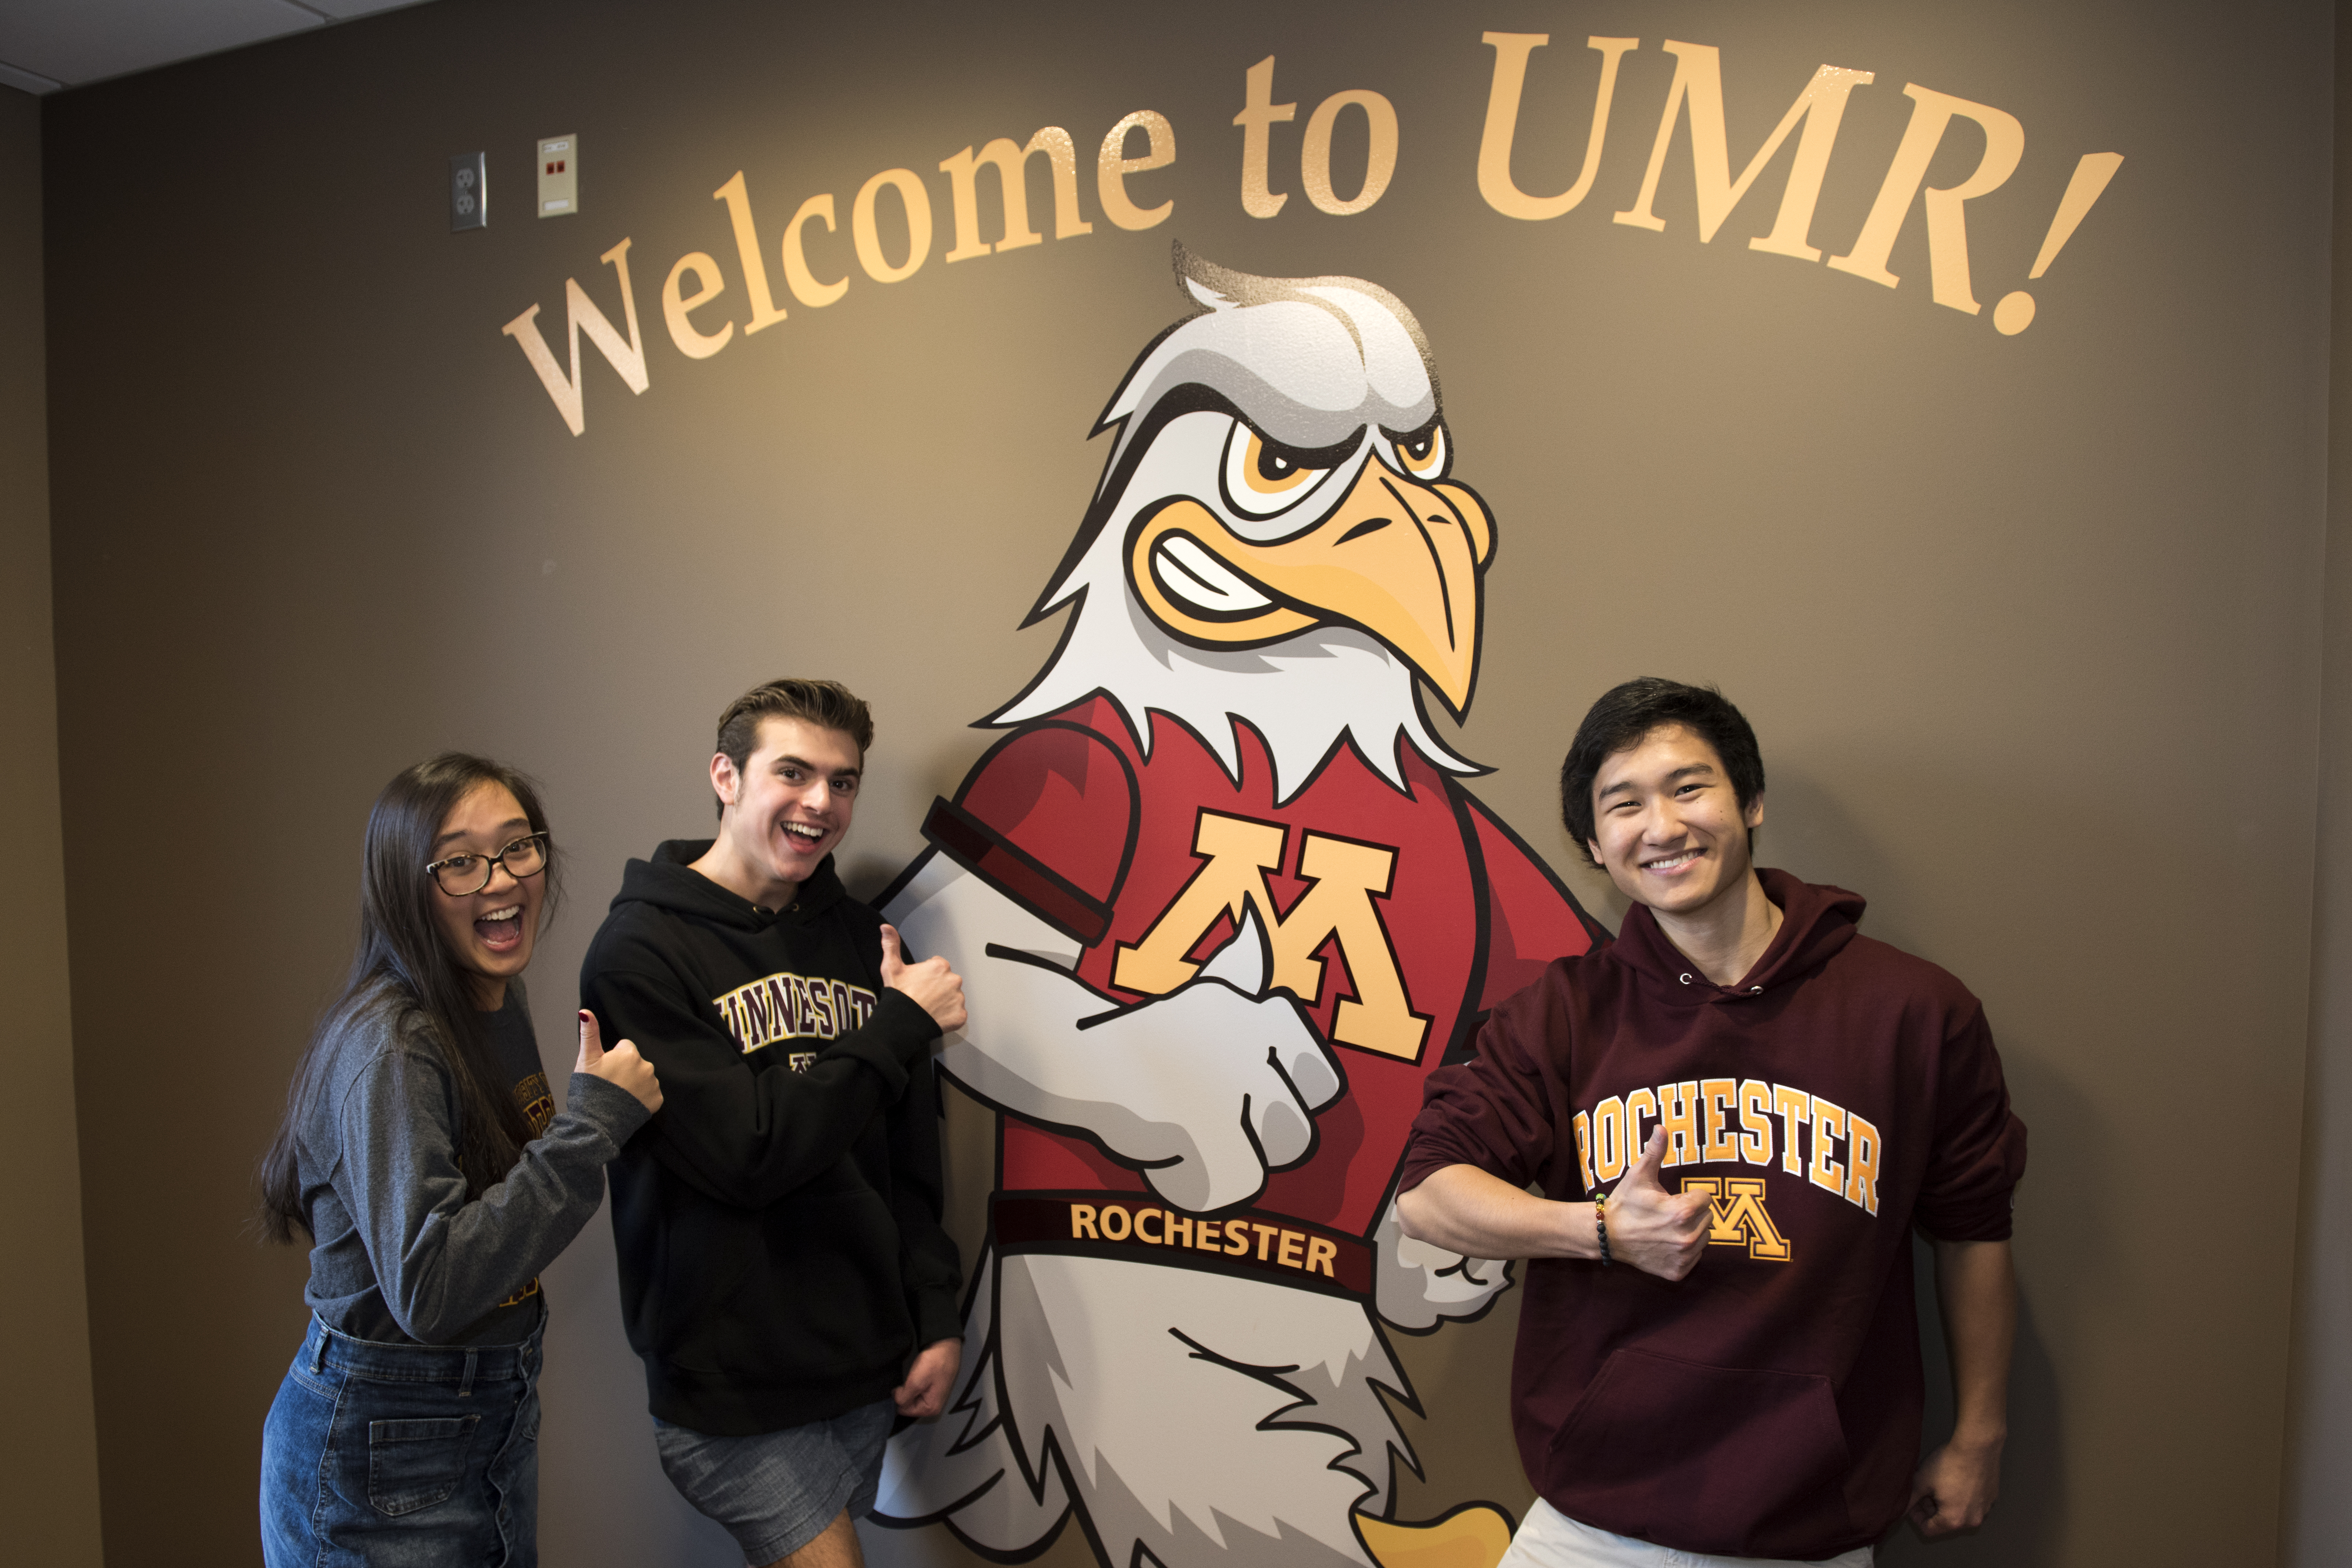 Three students smiling and giving a thumbs up, standing in front of a mural that says "Welcome to UMR!"